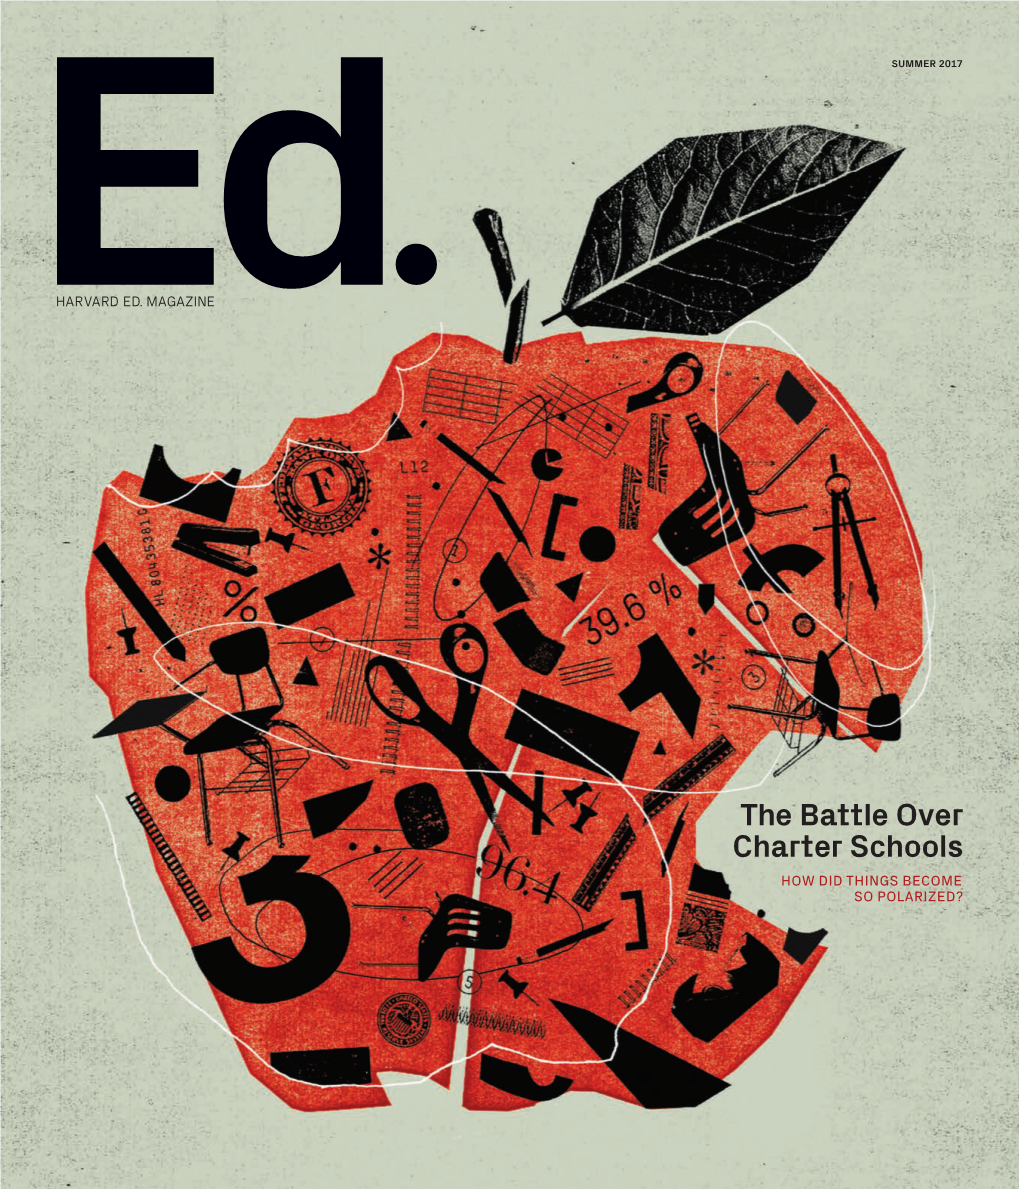 The Battle Over Charter Schools HOW DID THINGS BECOME SO POLARIZED?